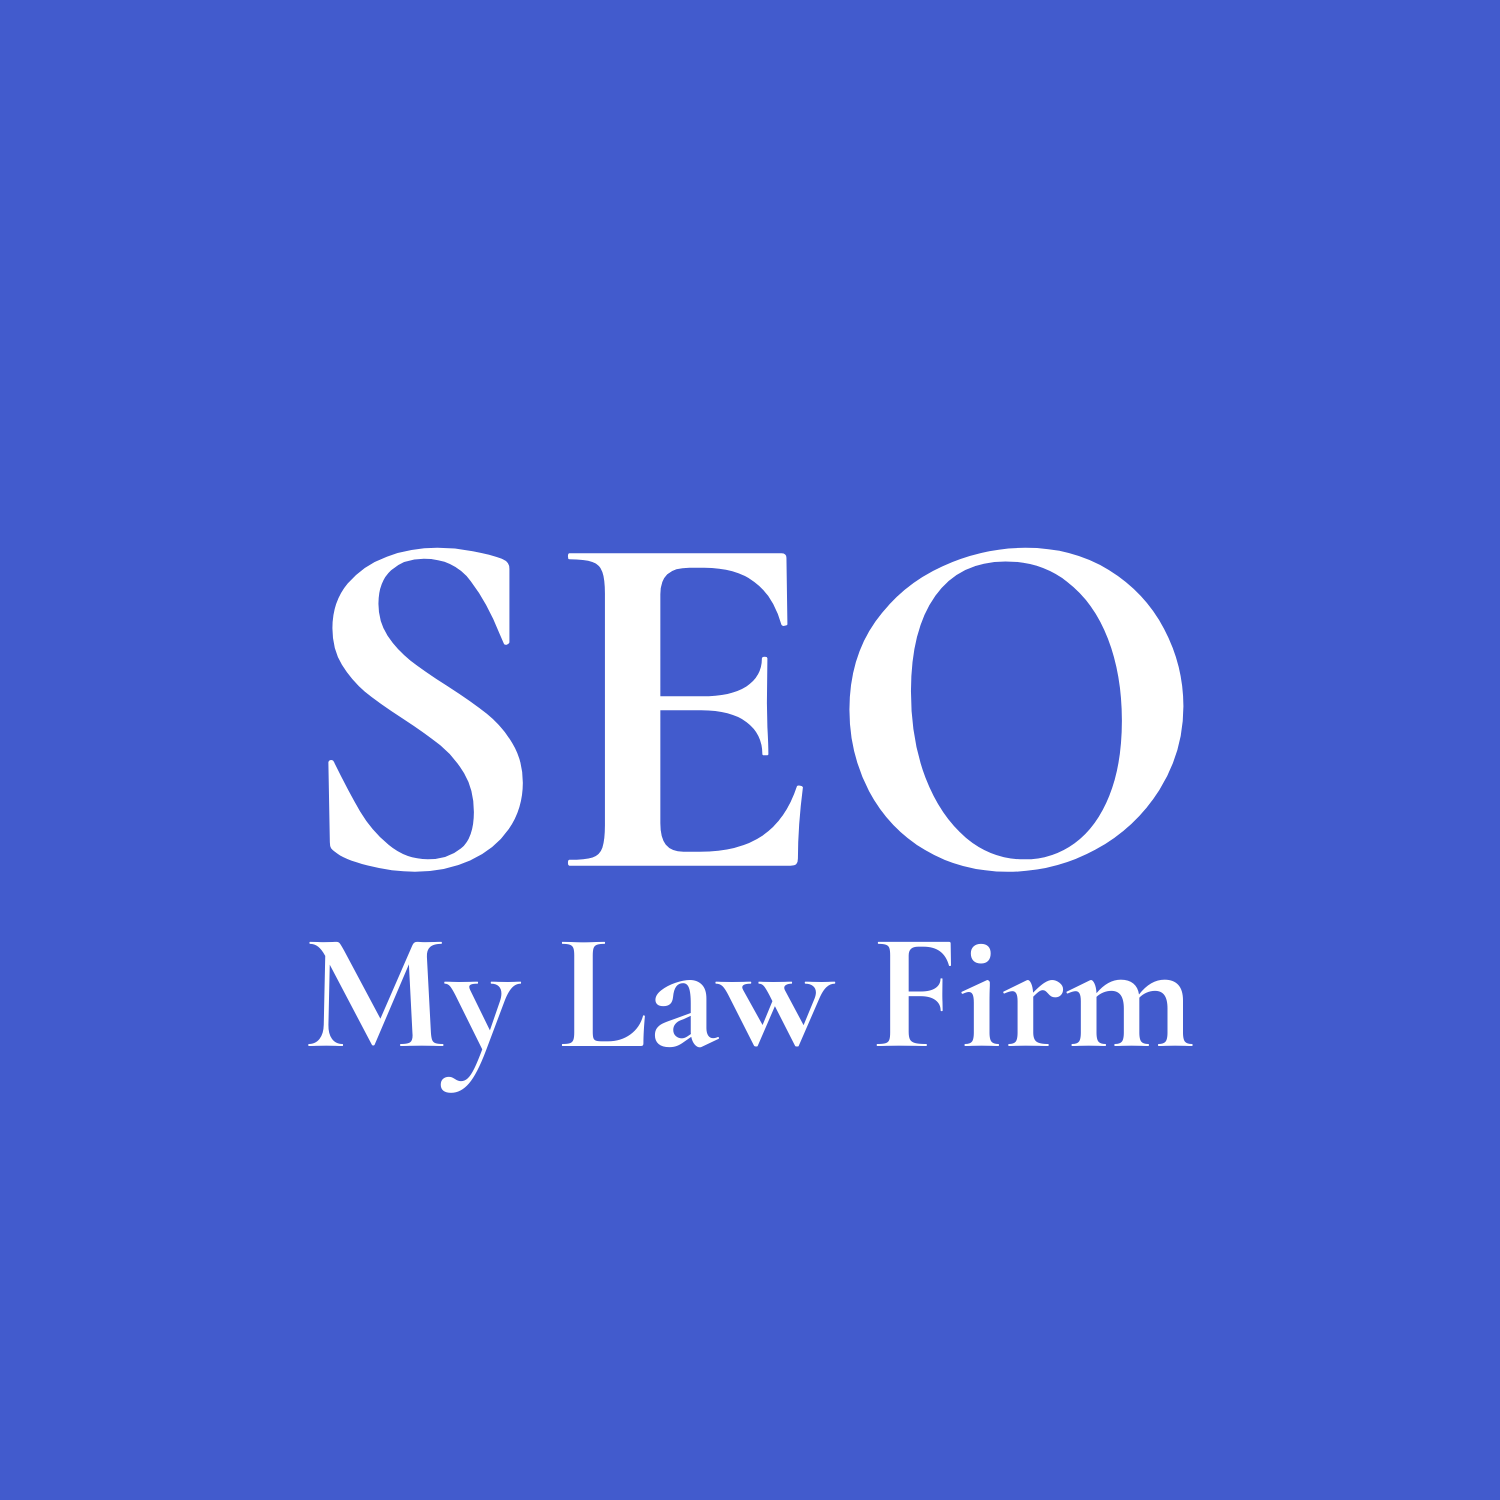 SEO MY LAW FIRM